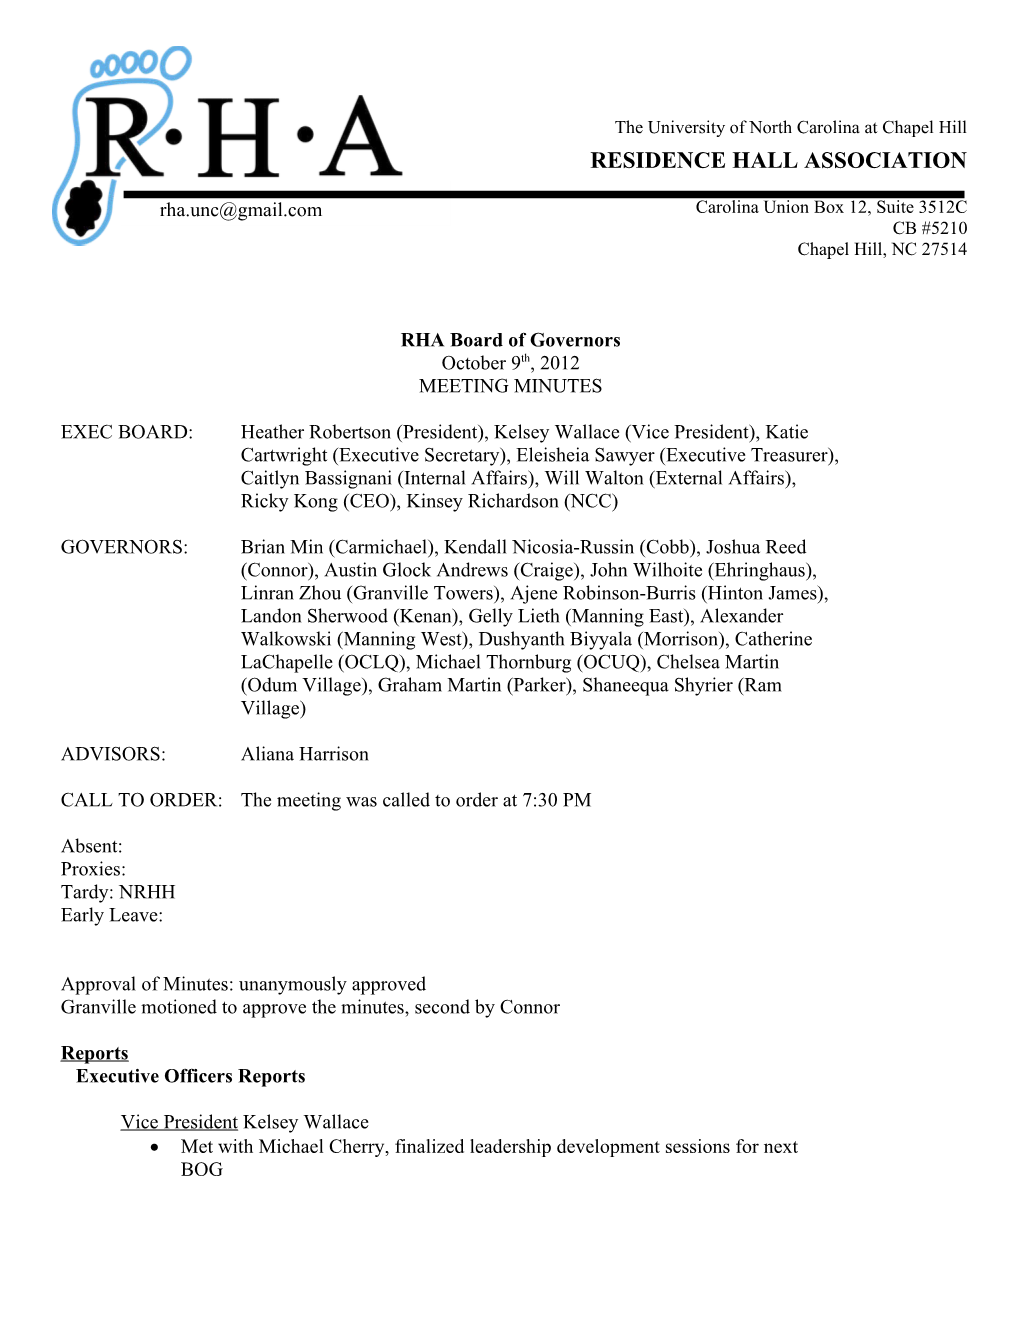 RHA Board of Governors s1